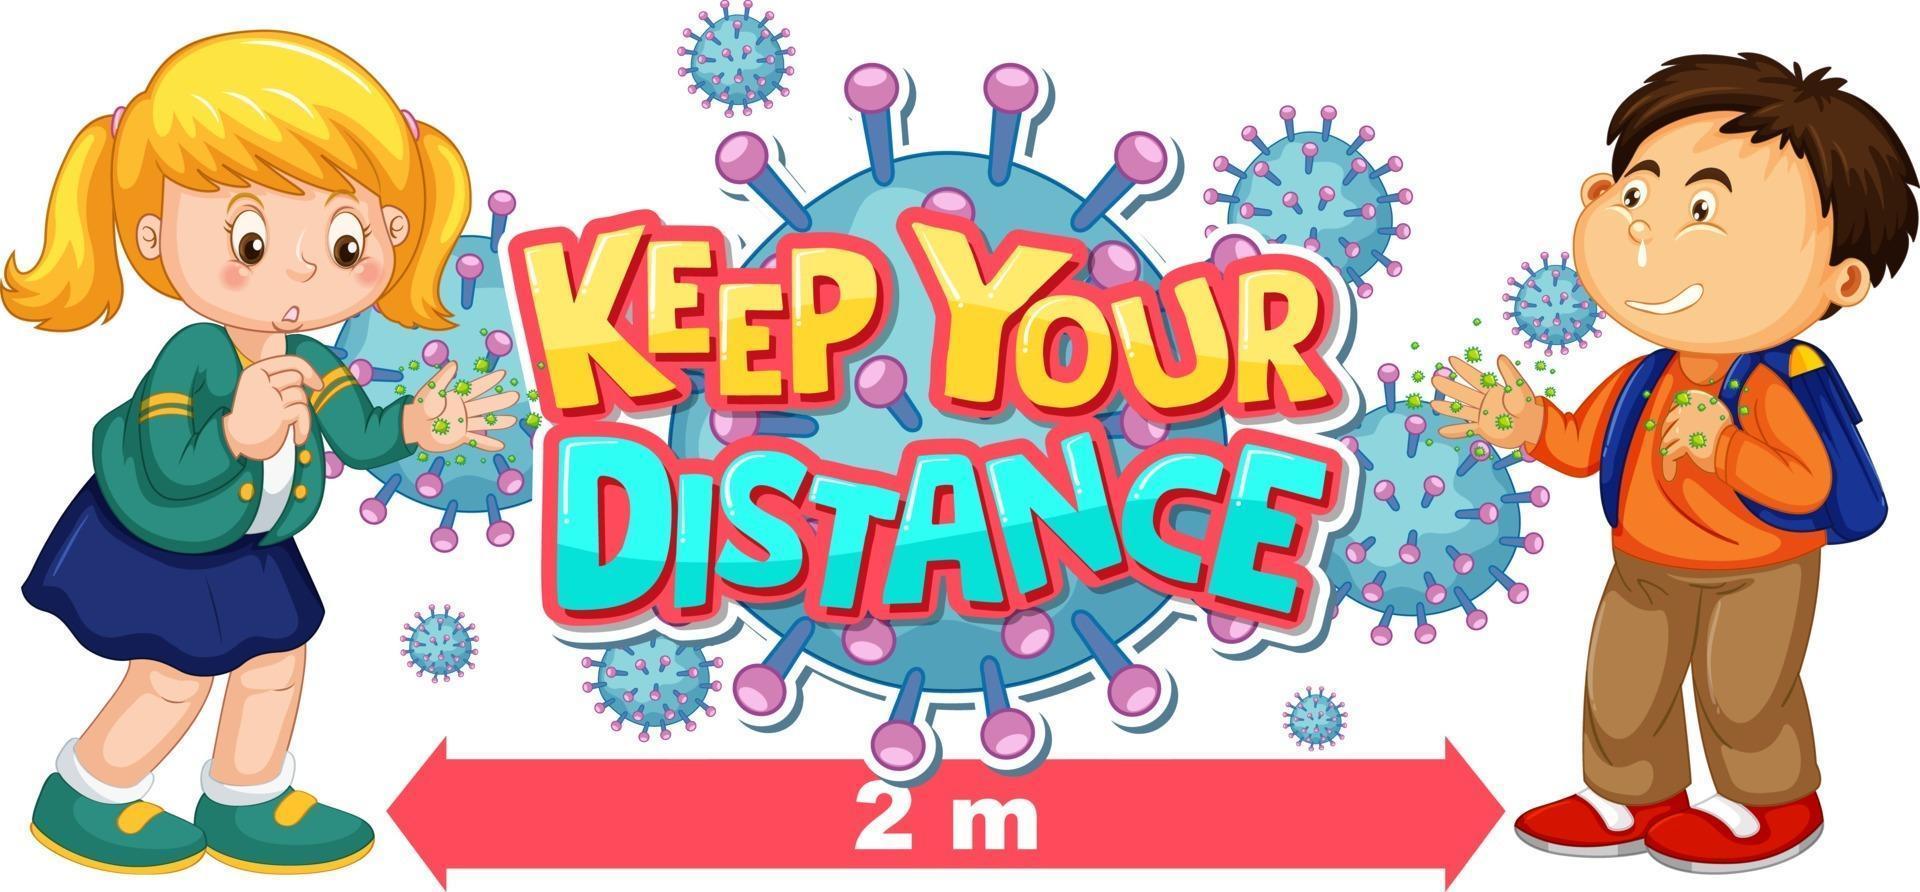 Keep your distance font design with kids showing thier dirty hands and coronavirus icon vector